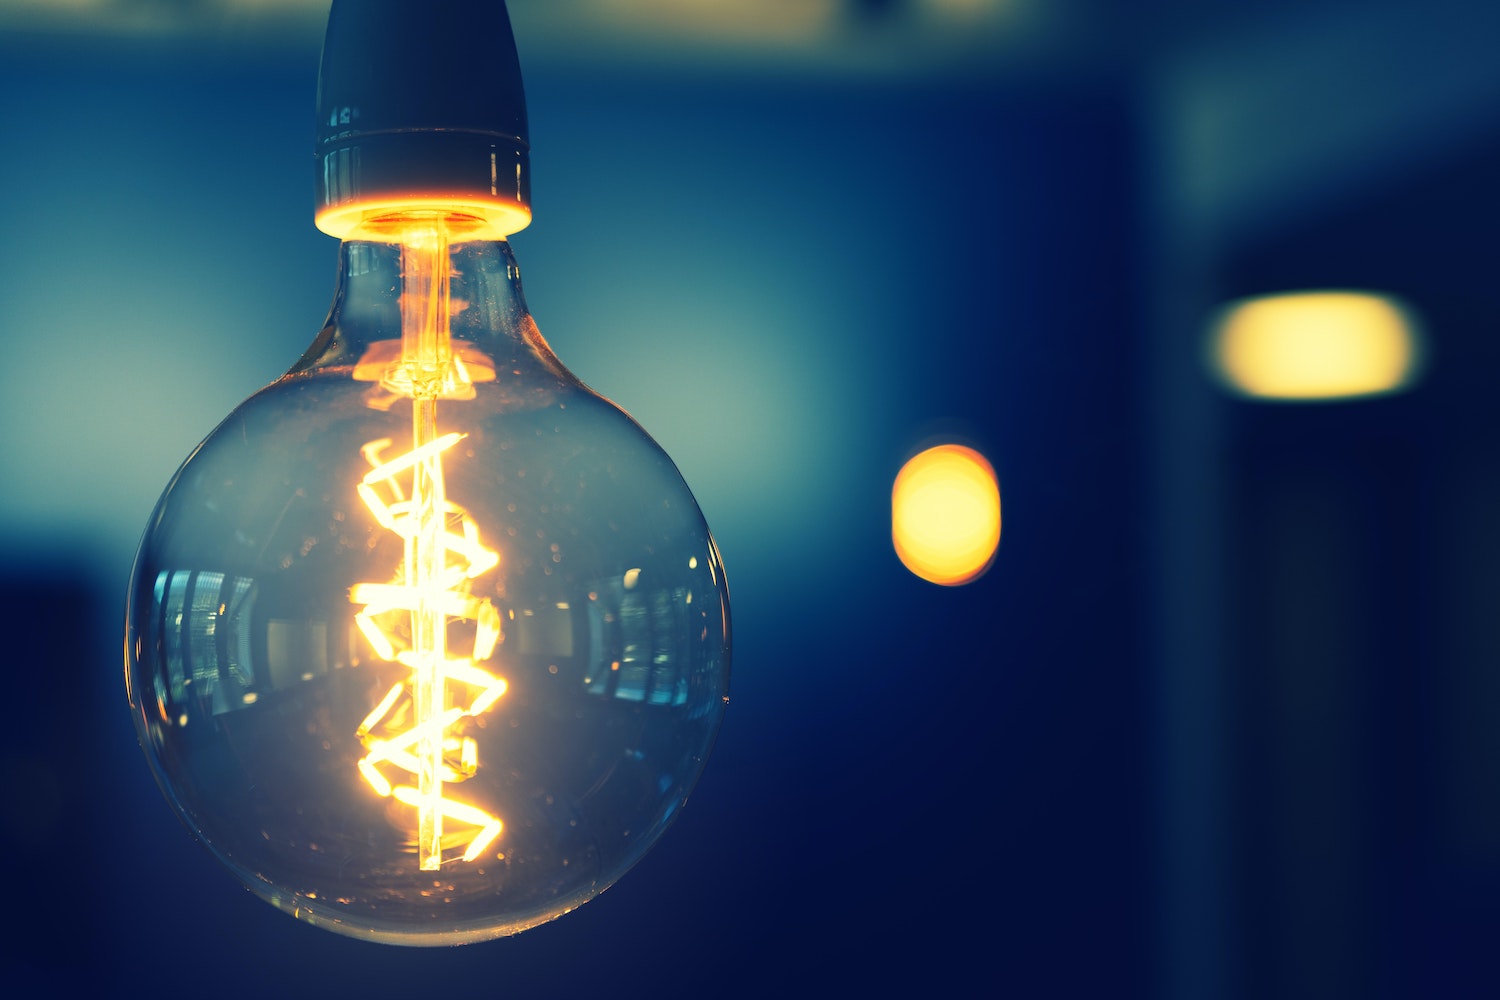 a rustic light bulb to the left of the photo against a blurry moody background